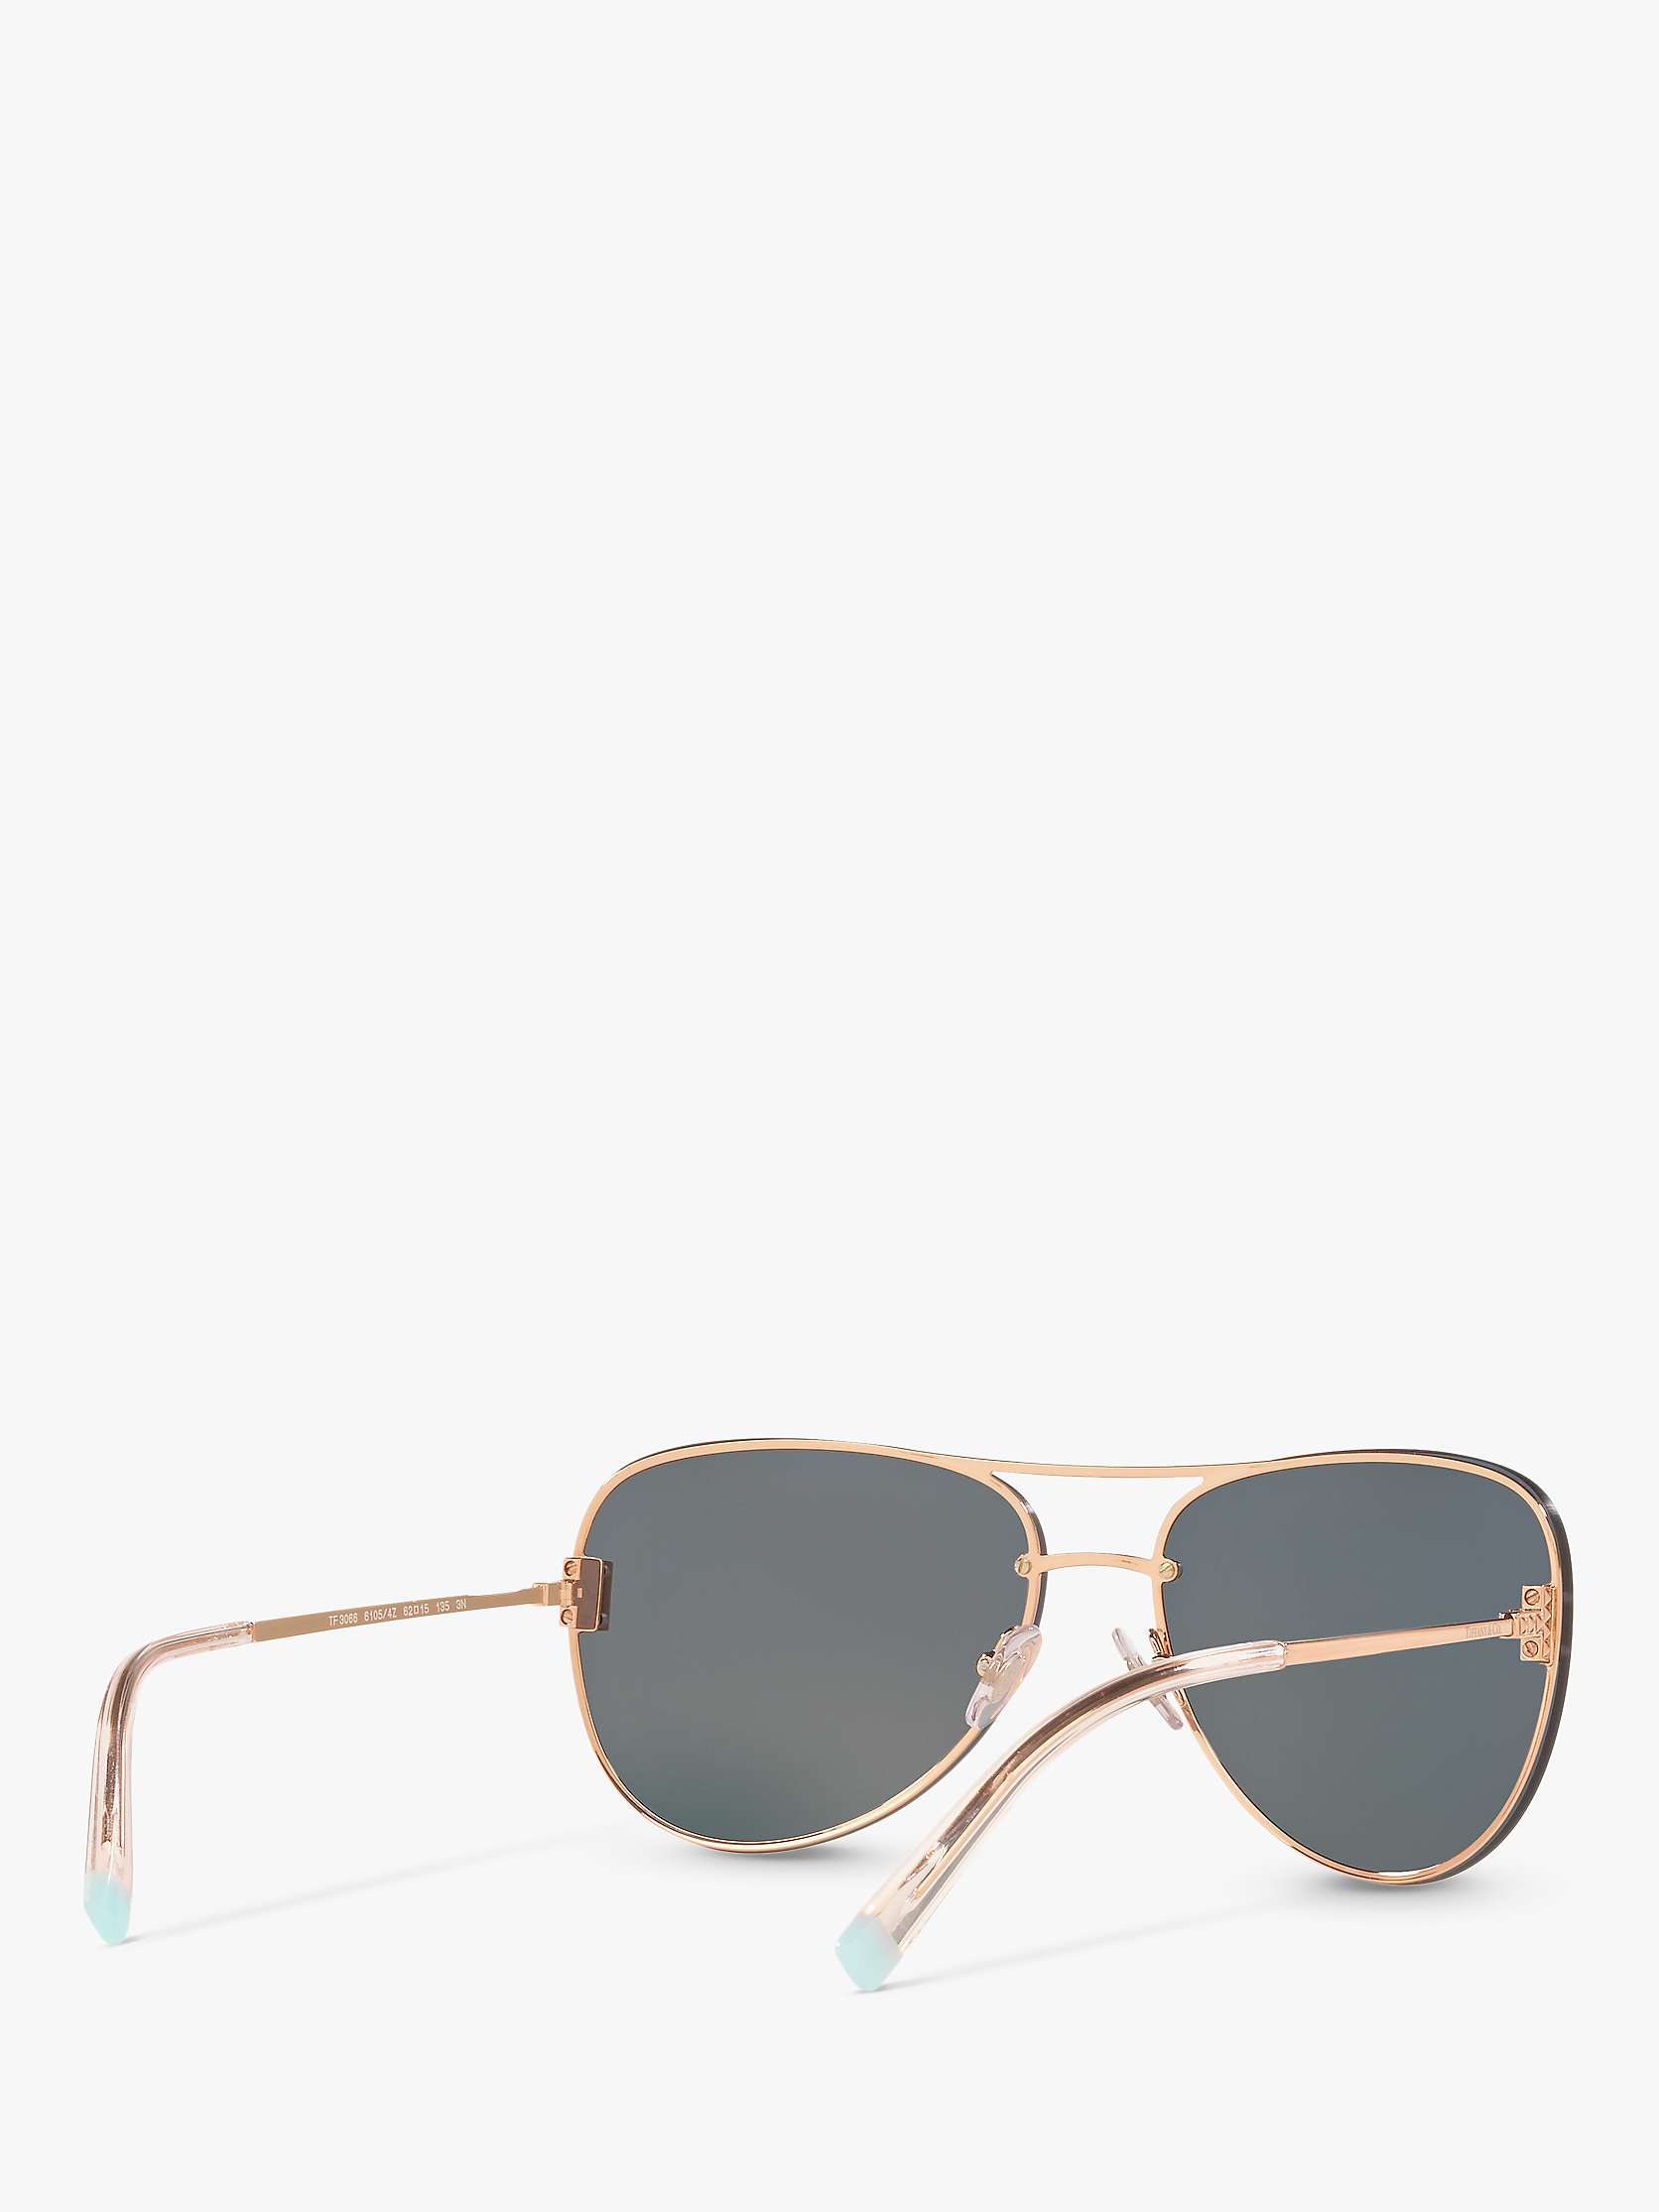 Buy Tiffany & Co TF3066 Women's Aviator Sunglasses, Red Maroon/Gold Online at johnlewis.com